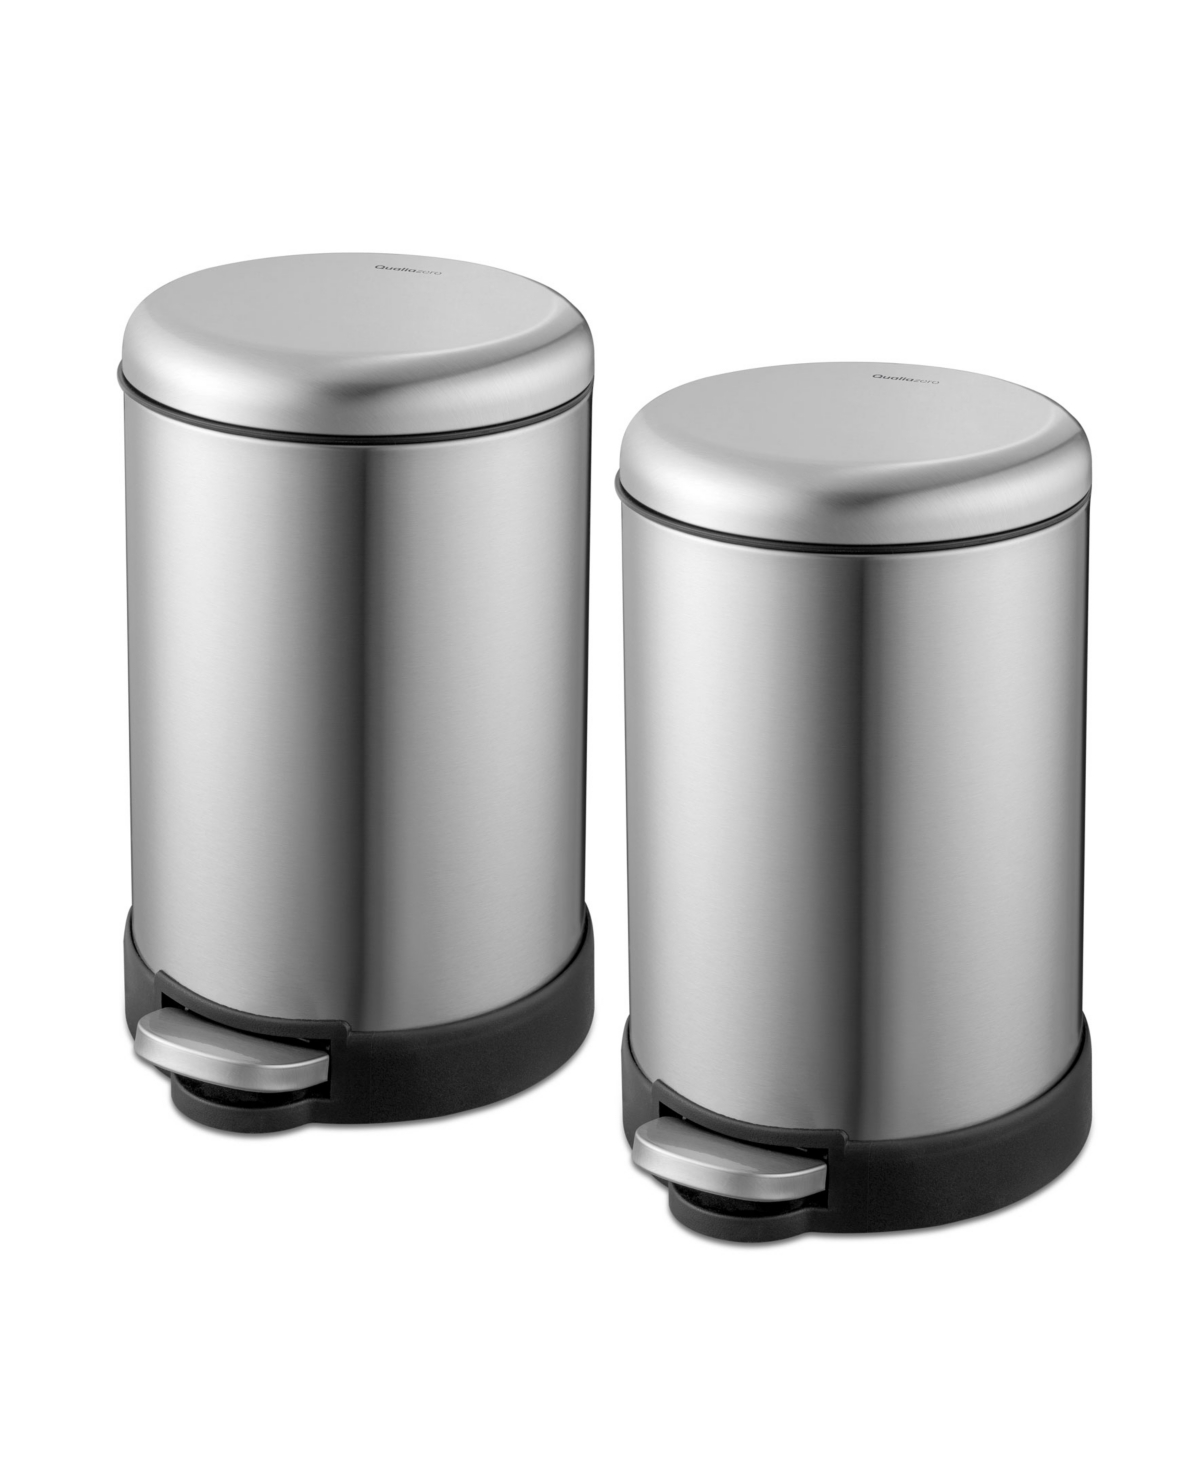 Two 1.6 Gallon Round Step On Trash Can Set, 2 Pieces, Stainless Steel, Twin Pack - Silver